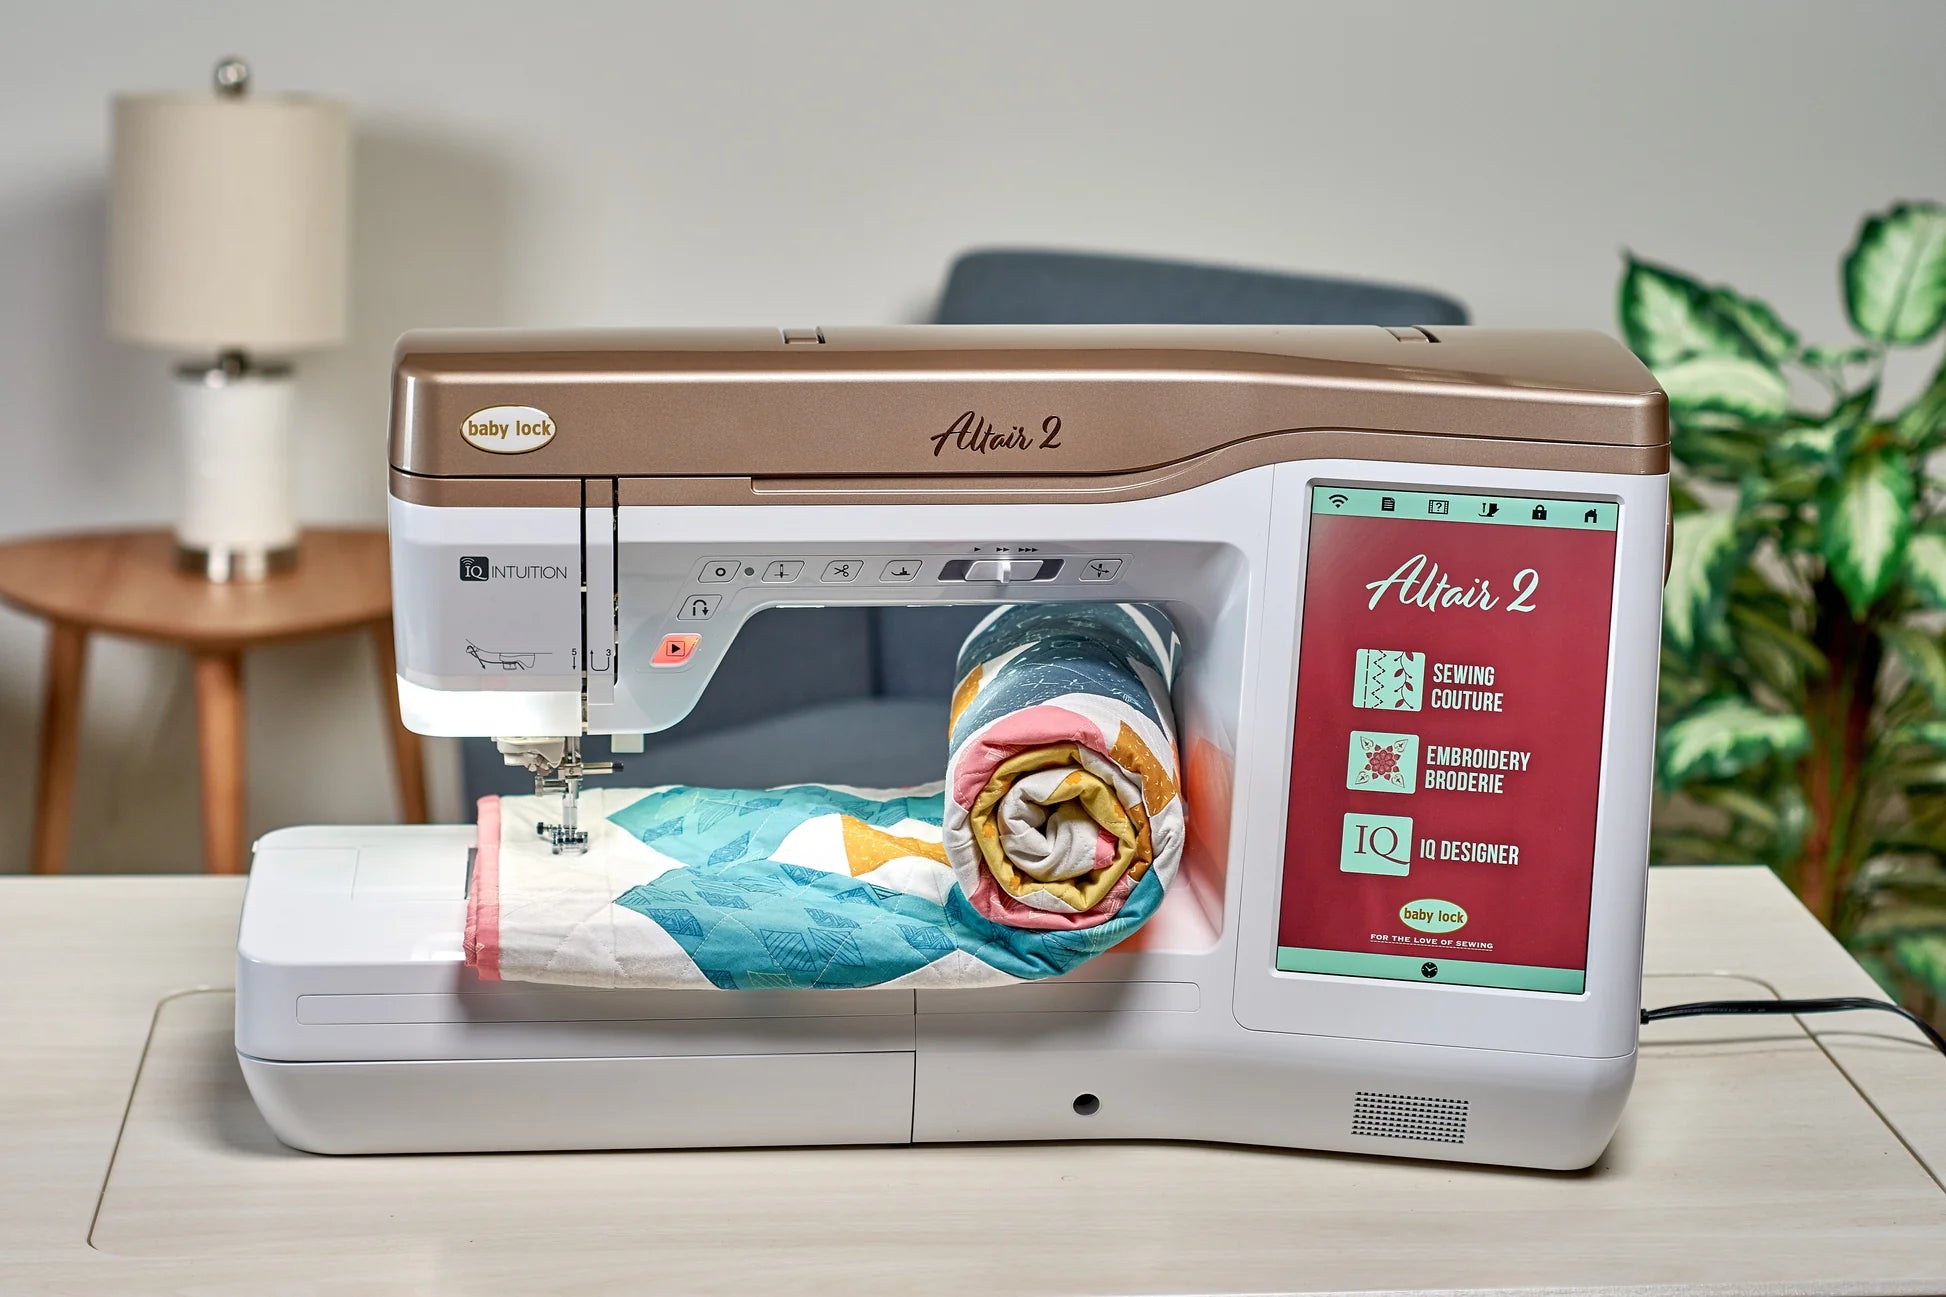 Baby Lock Altair 2 Embroidery and Sewing Machine